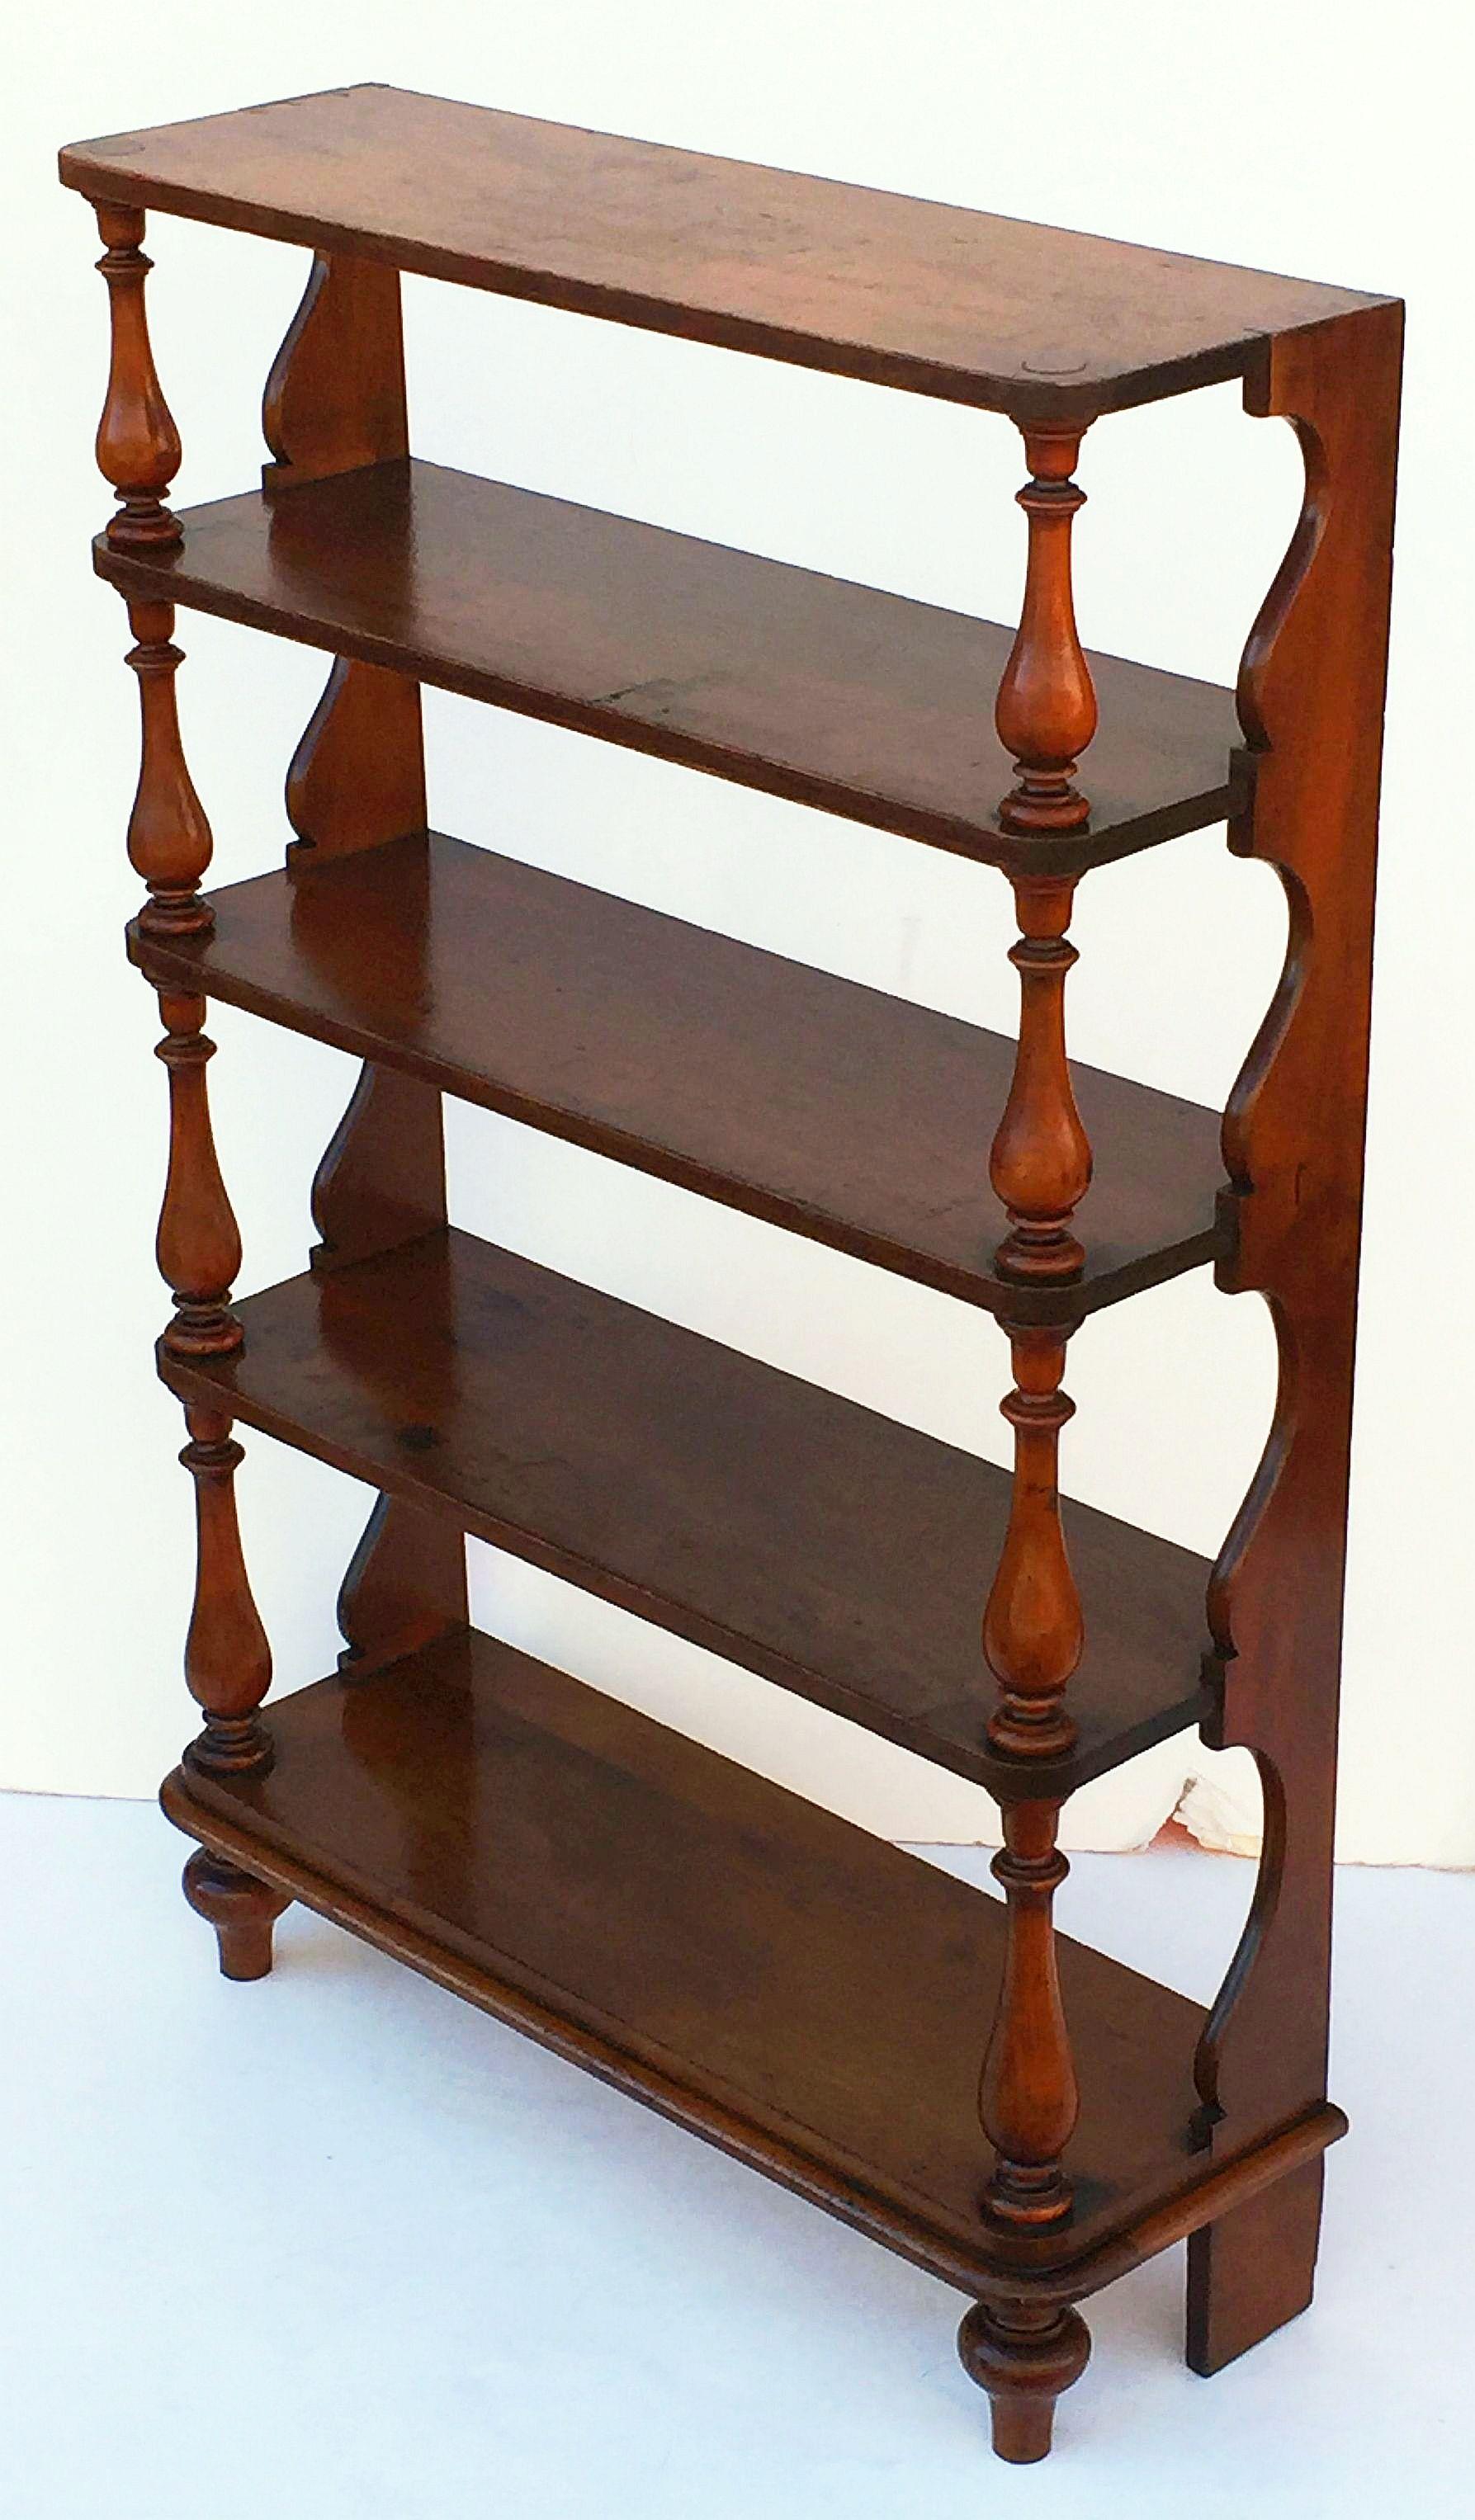 Tall English Standing Shelves or Bookcase Étagère of Fruitwood 1